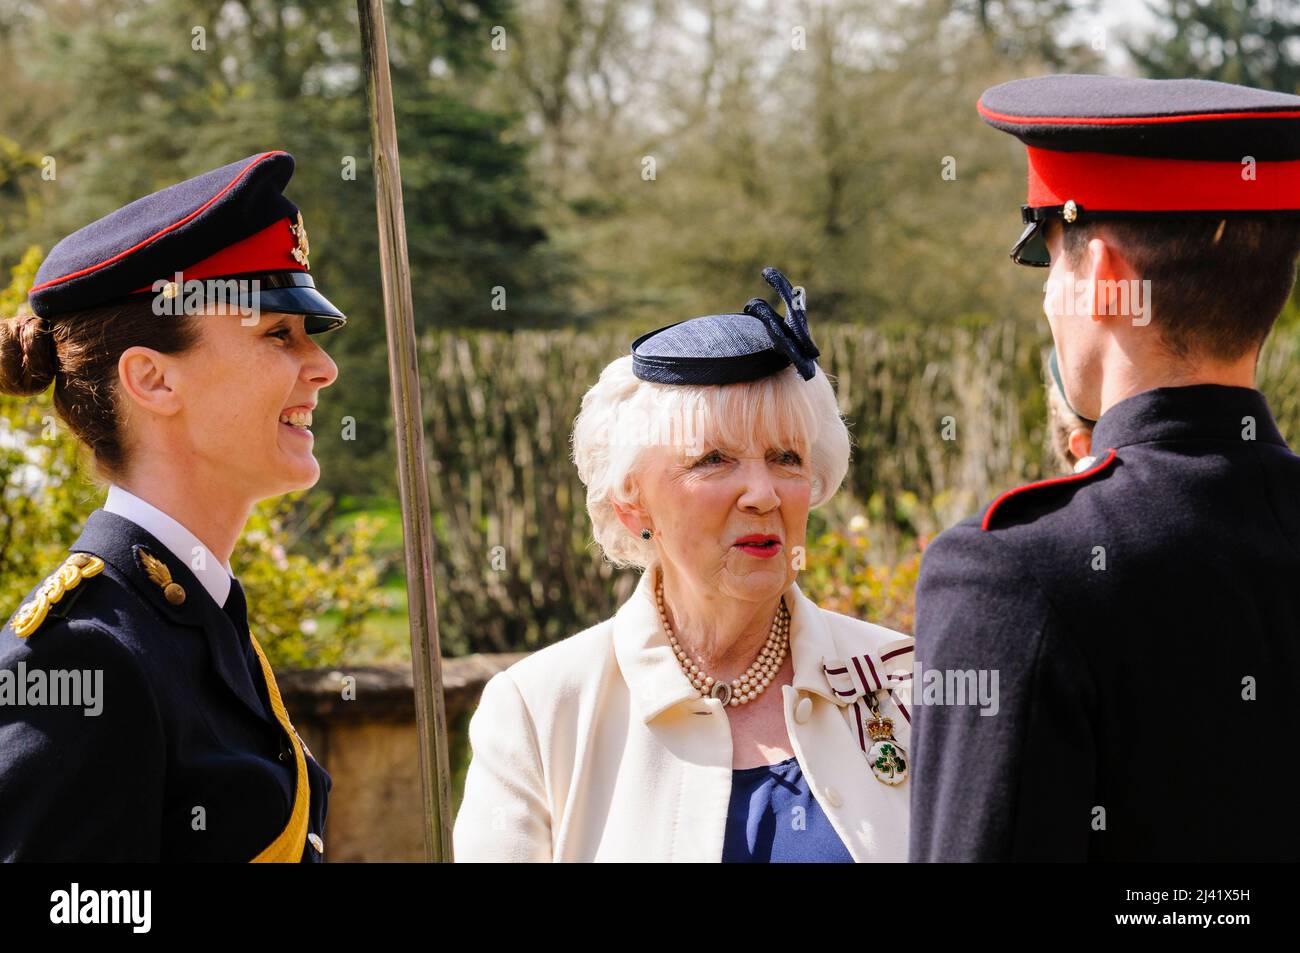 HILLSBOROUGH, NORTHERN IRELAND - APR 21 2016: Lord Lieutenant of County Antrim, Mrs. Joan Christie, congratulates members of Queens University Officer Training Corps who were given the honour of firing the special 21 Gun Salute to celebrate HM Queen Elizabeth's 90th birthday. Stock Photo